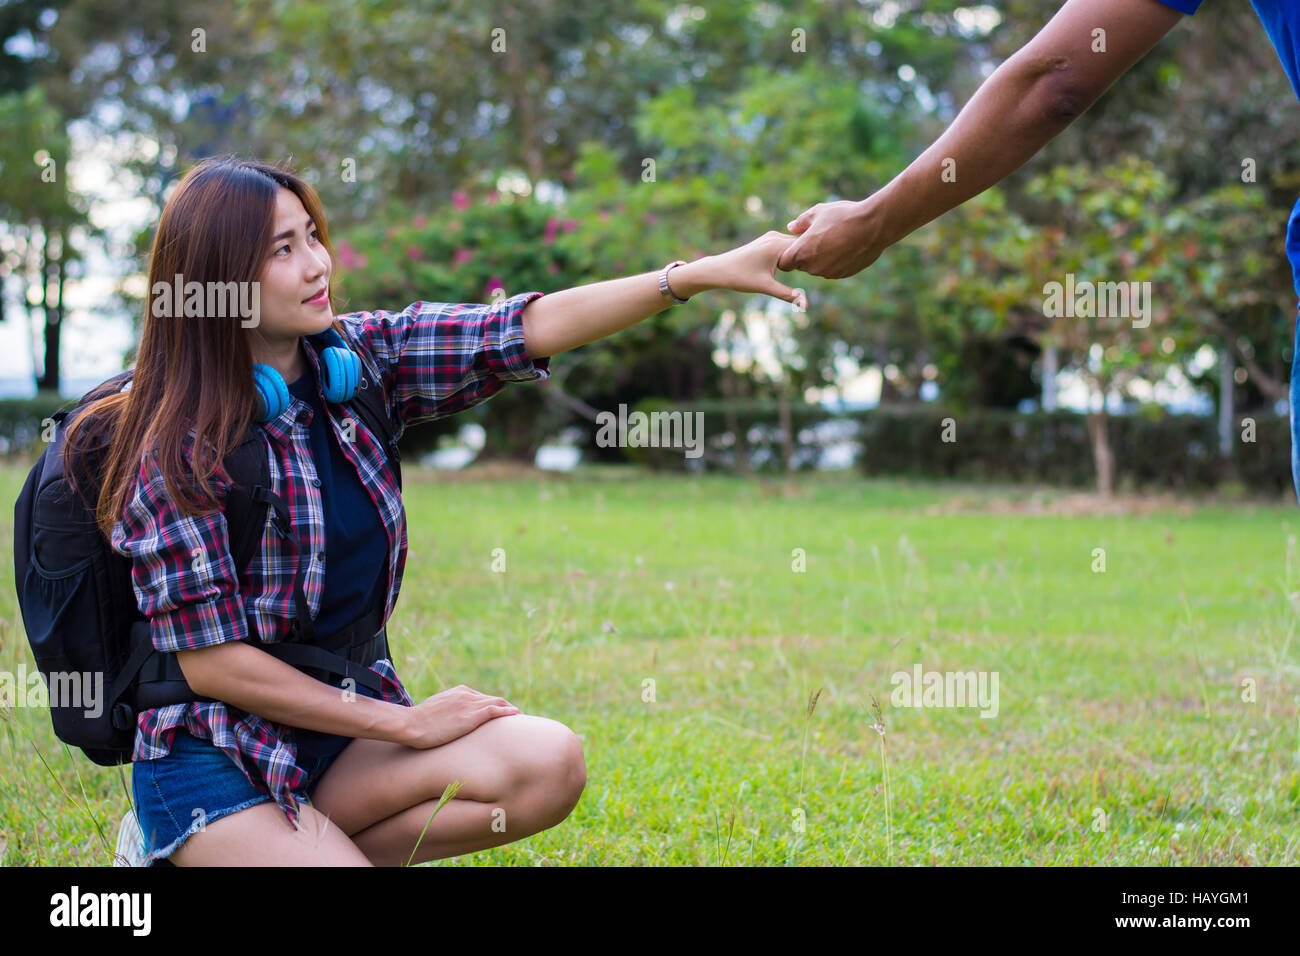 Woman sitting on the grass reaching to shake the hand of man. helping hand and love concept. Stock Photo